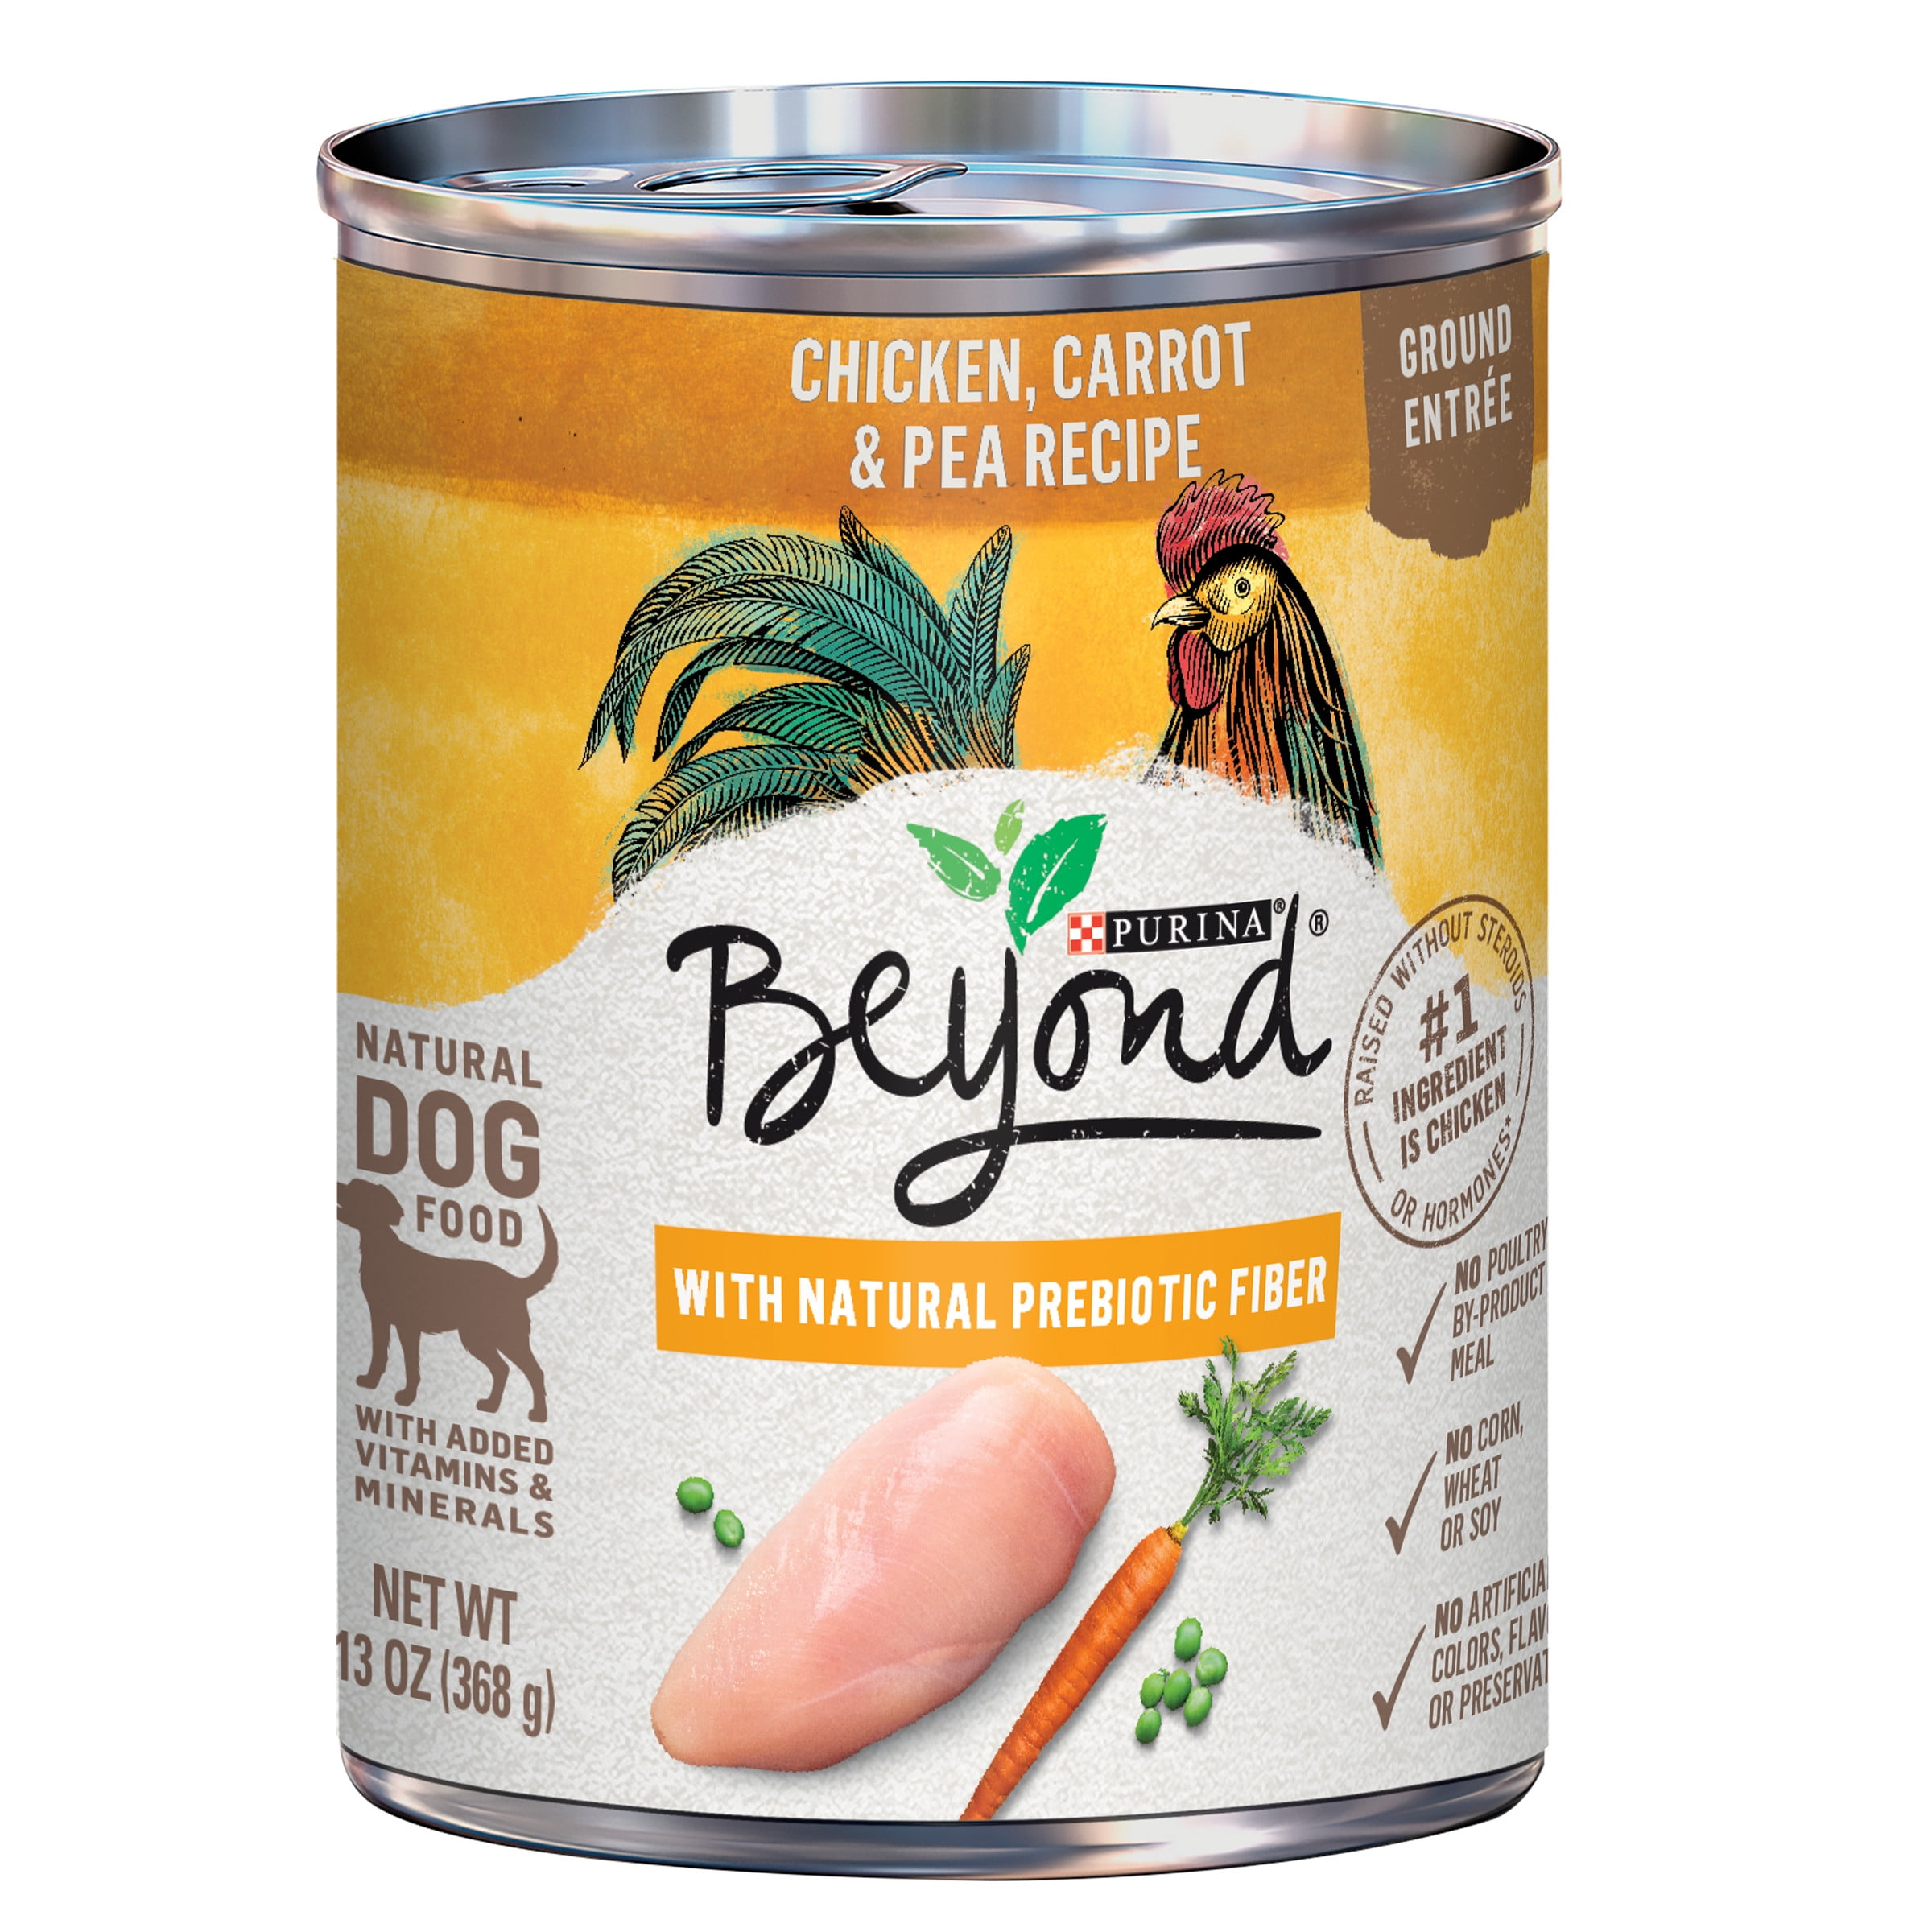 Purina Beyond Natural Wet Dog Food Pate, Grain Free Chicken Carrot & Pea Recipe Ground Entree, 13 oz. Can